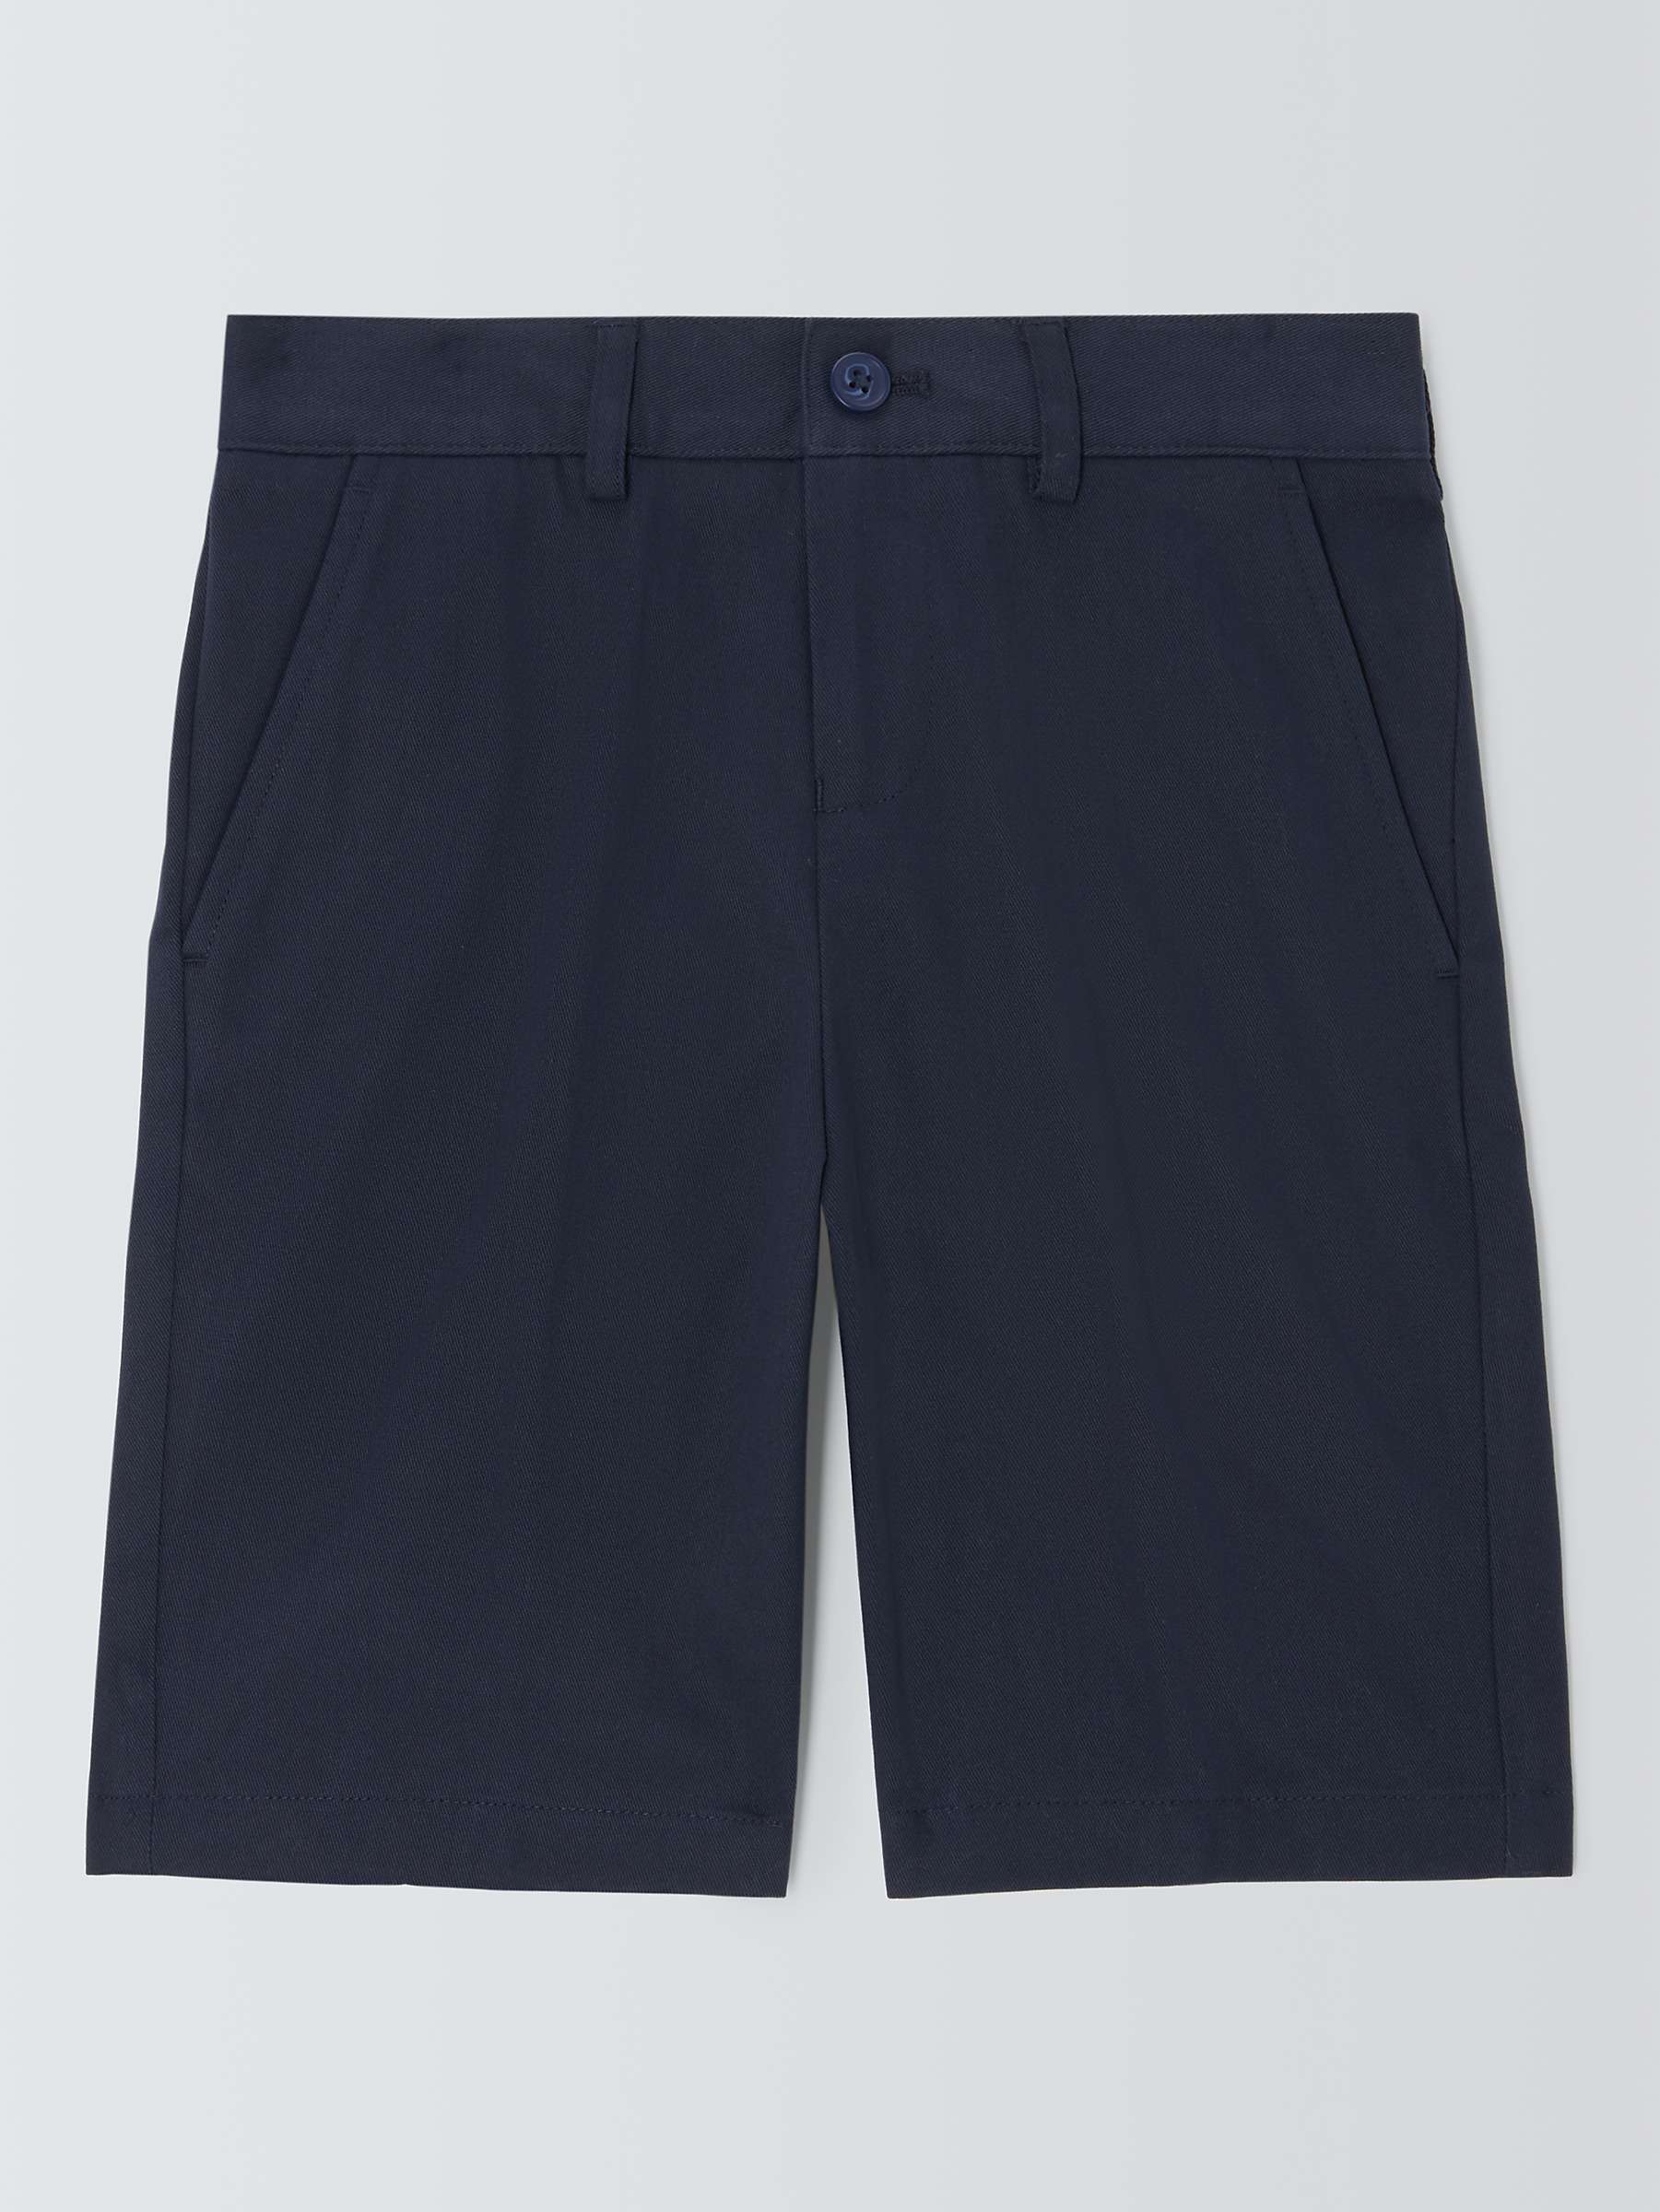 Buy John Lewis Heirloom Collection Kids' Chino Shorts Online at johnlewis.com